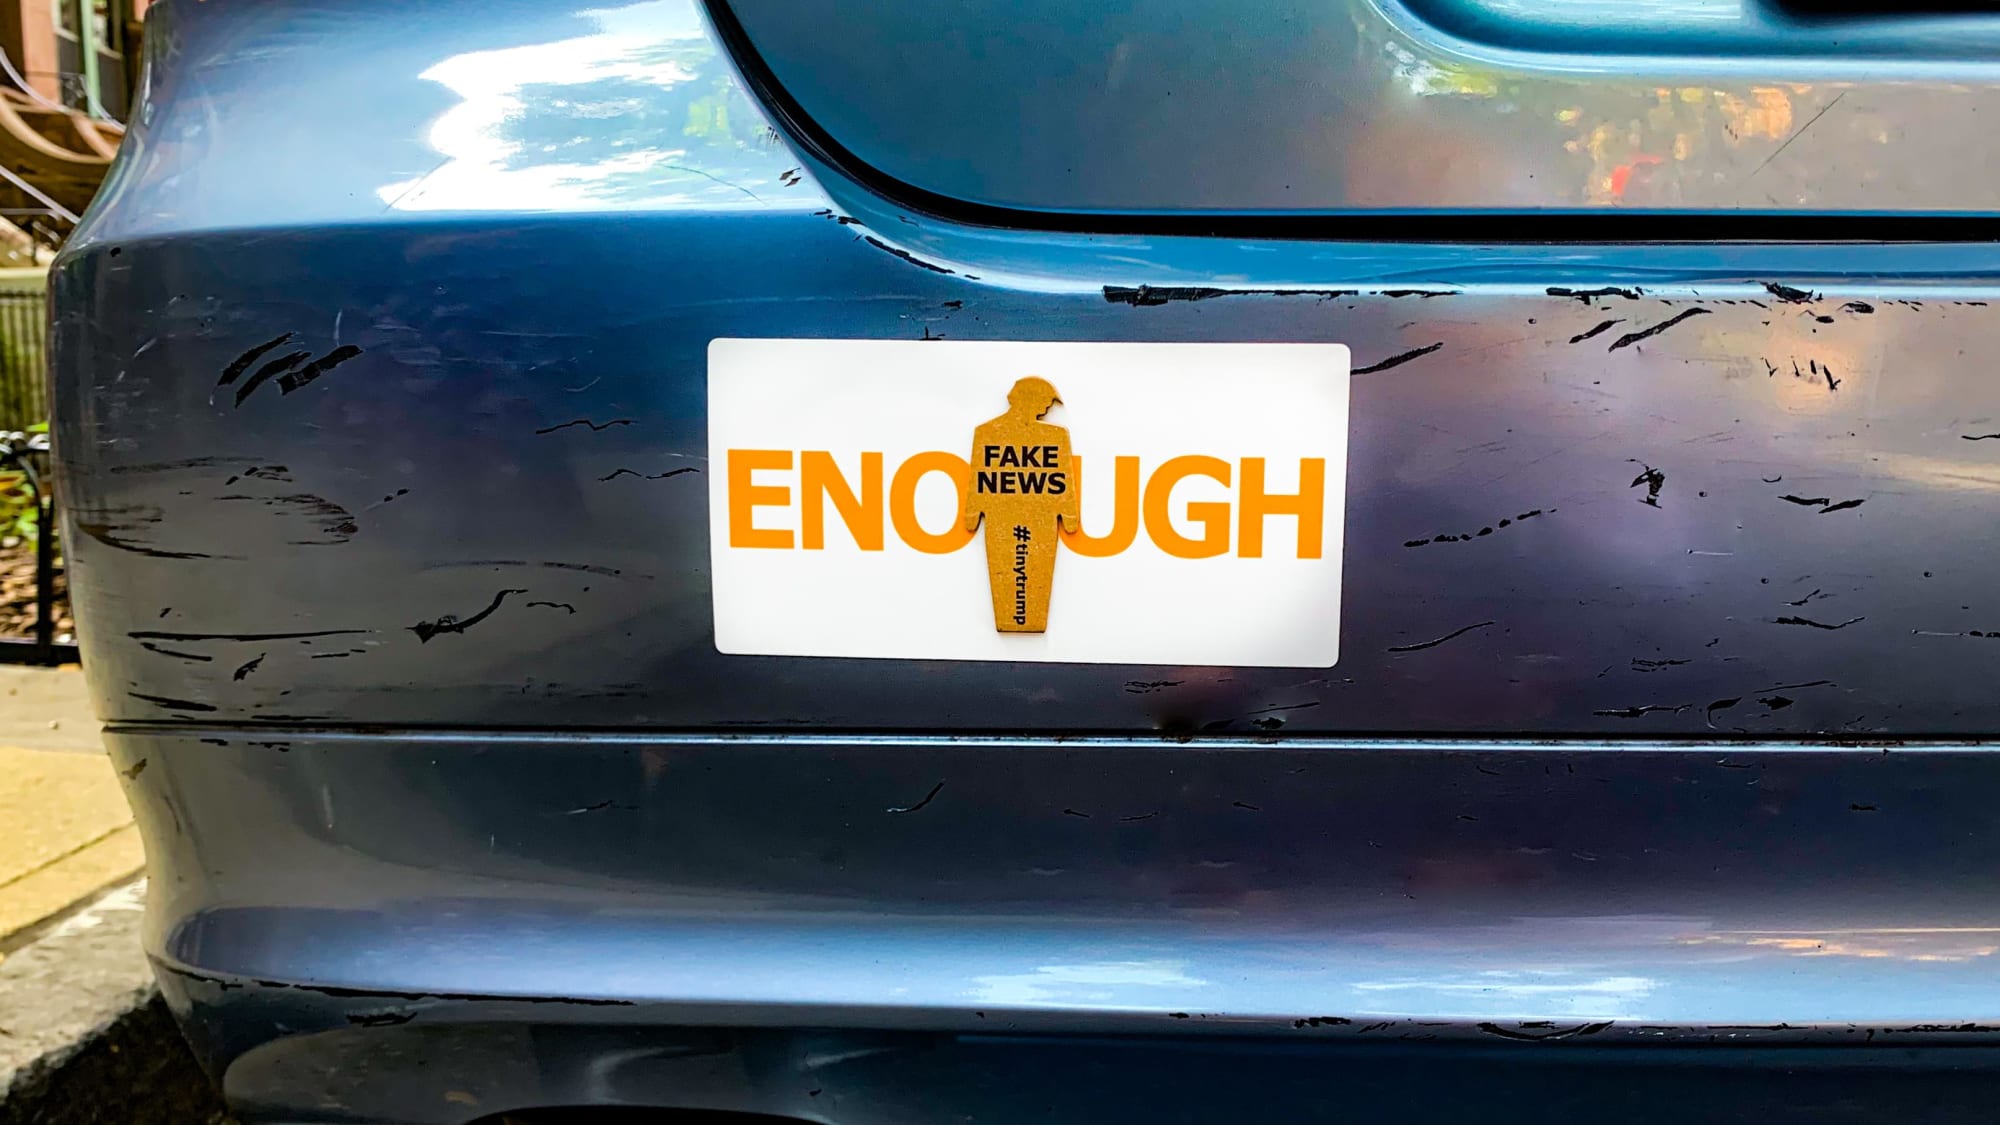 Photograph of a tiny trump ENOUGH sticker on a car bumper. The tiny trump stuck in the middle bears the slogan Fake News, so the combination reads ENOUGH Fake News.